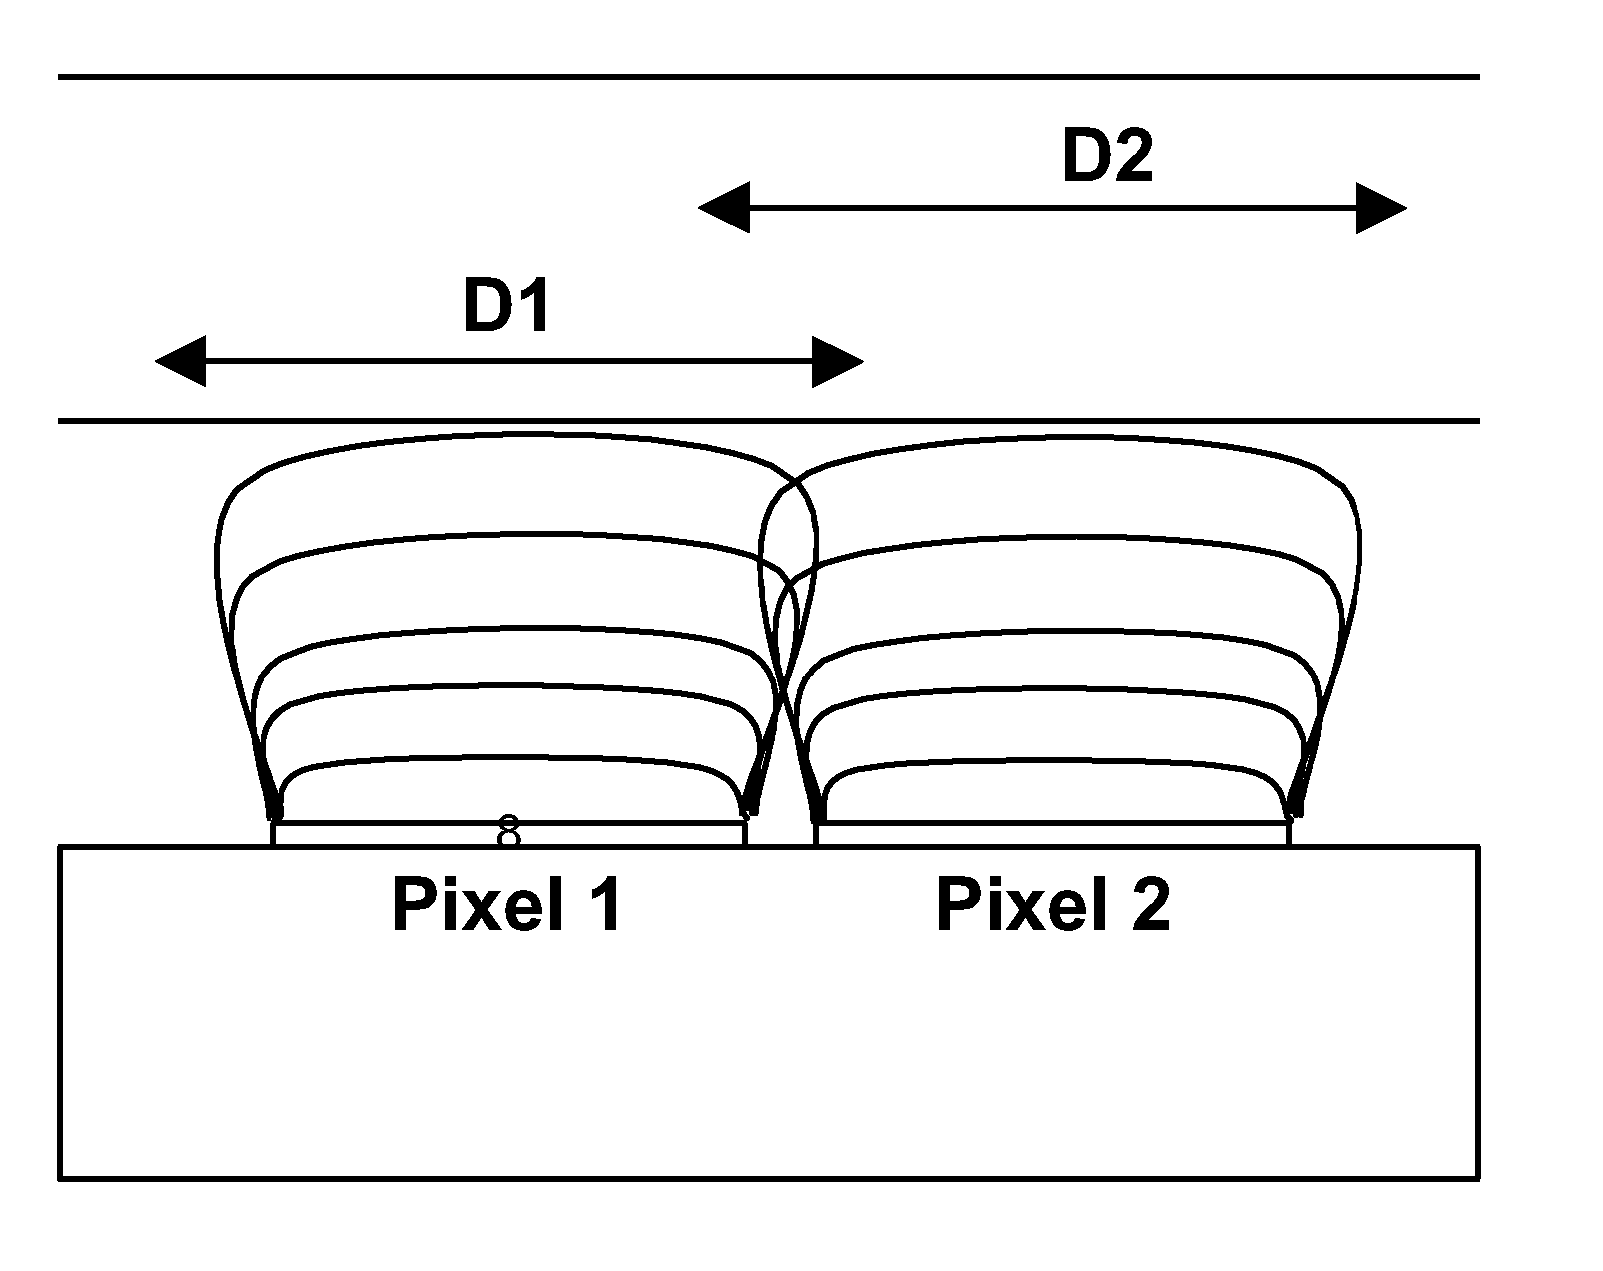 Backplanes for electro-optic displays